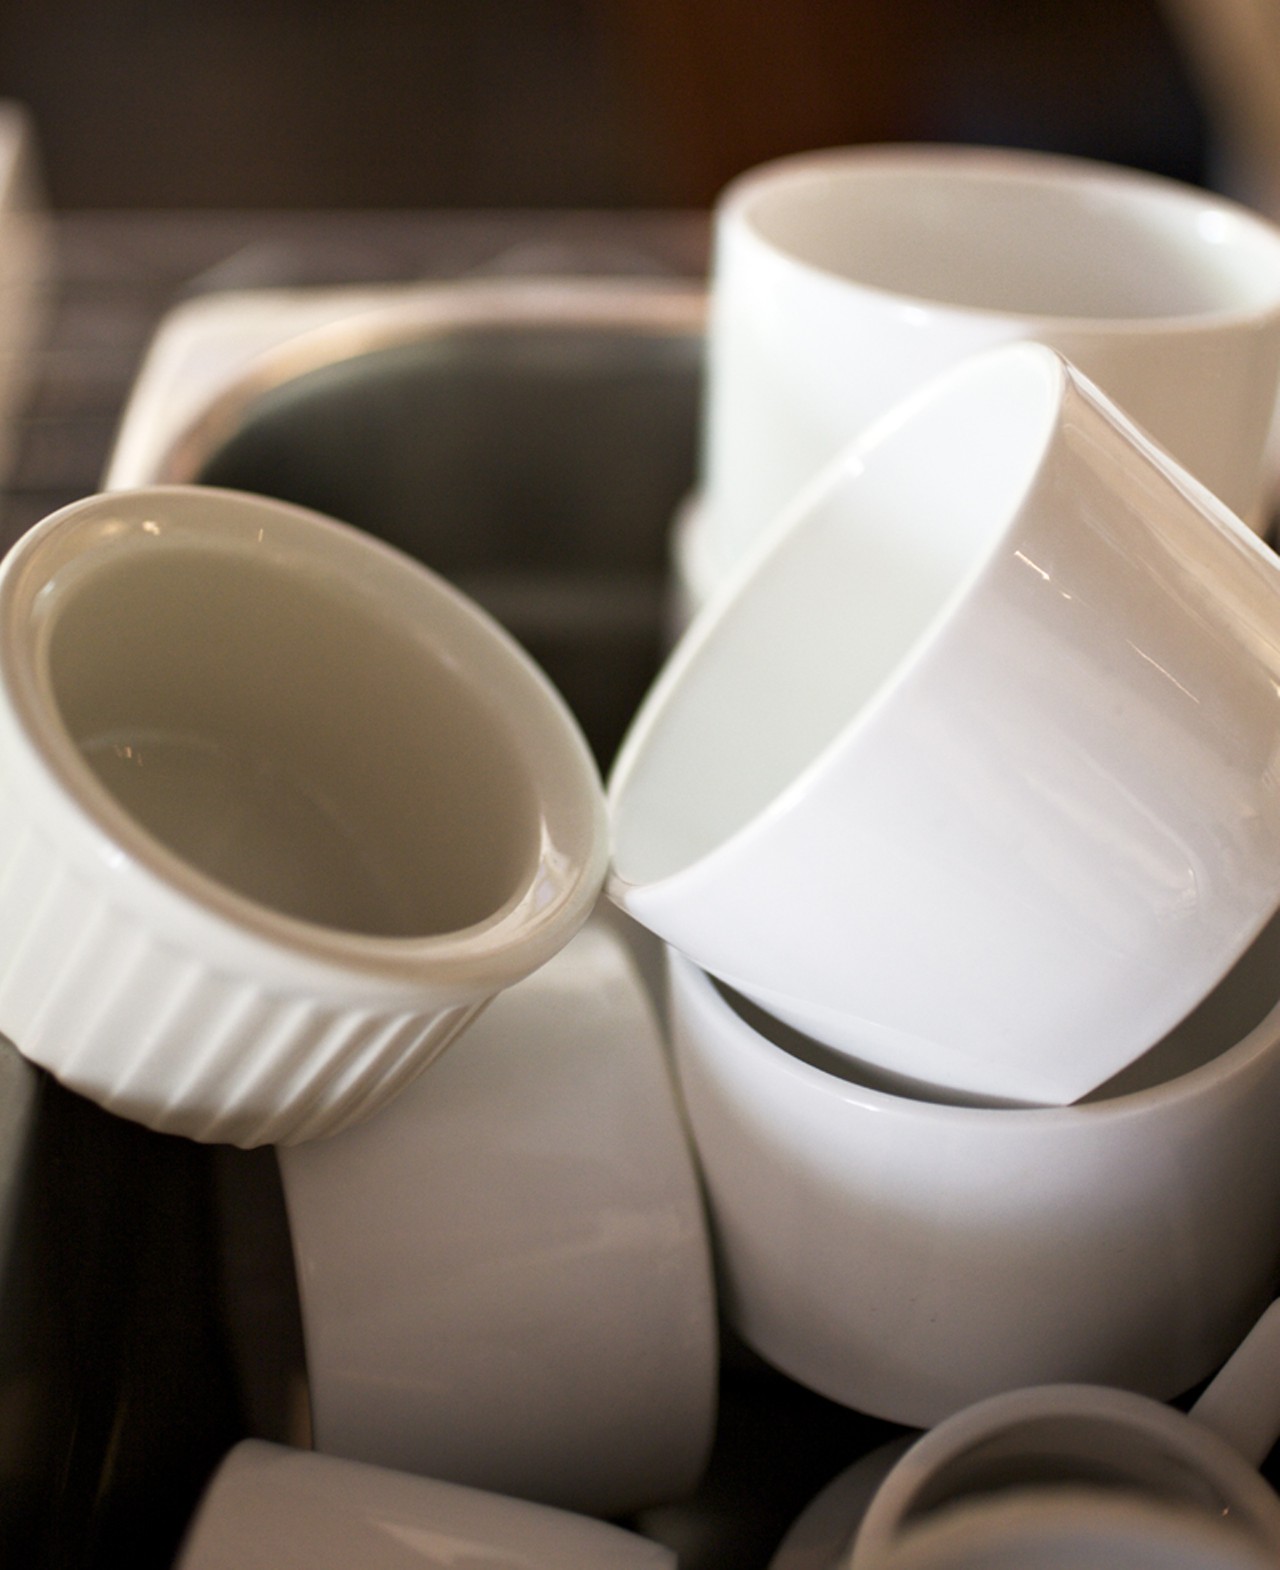 Part of the casual appeal, dishes sit on open shelves waiting for use while creating a wall in the main dining room.